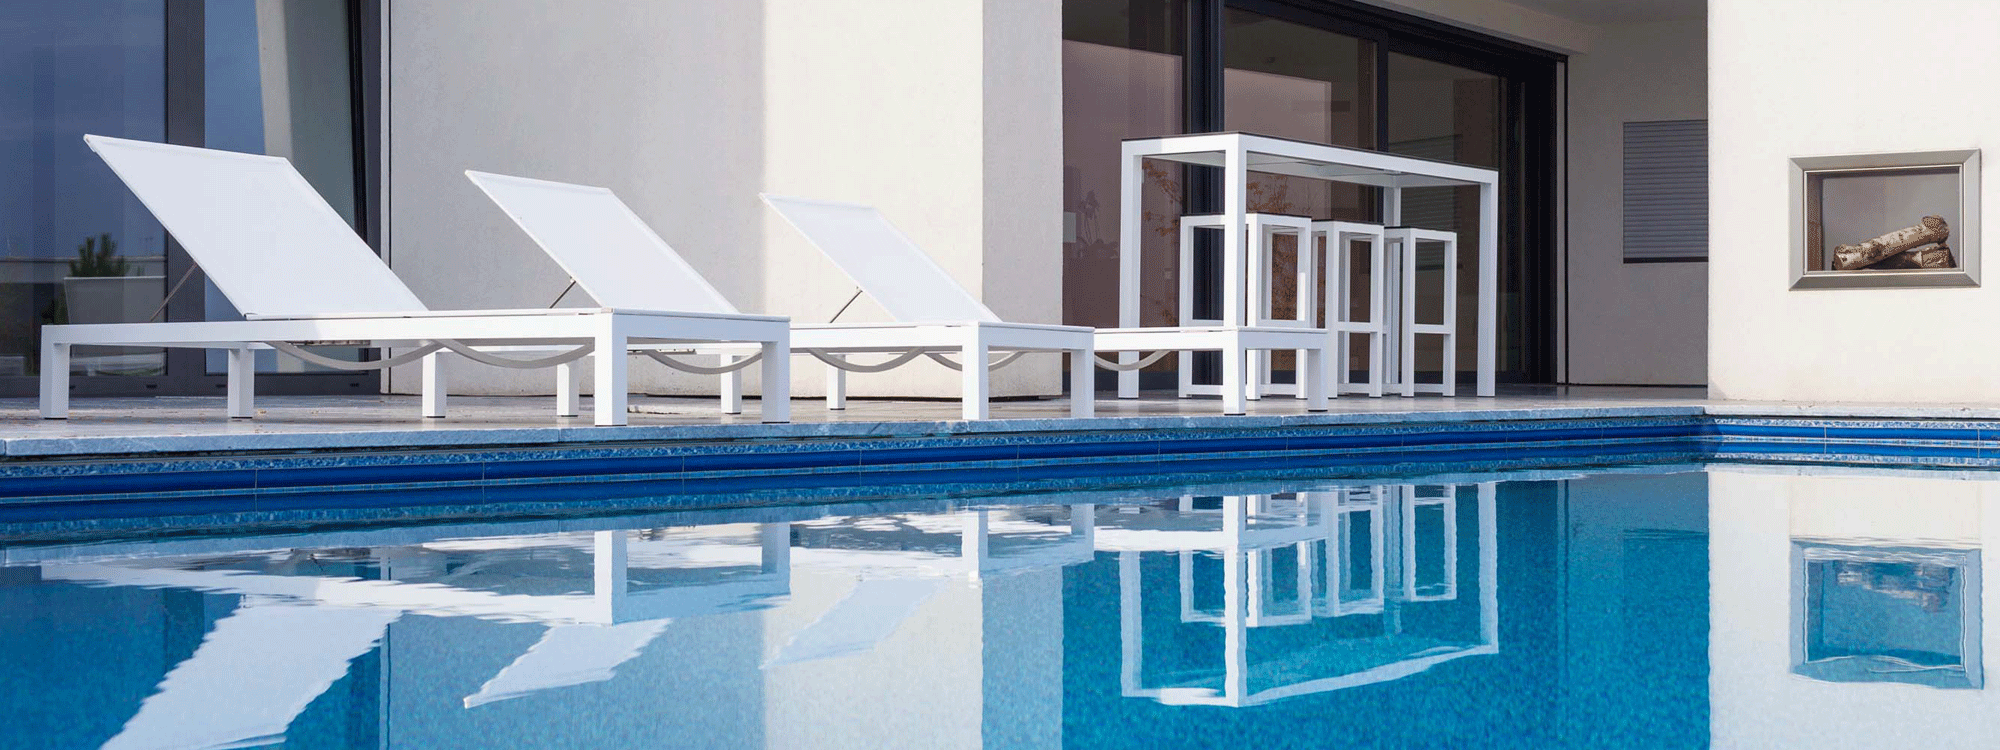 Image of 3 Leuven white sun loungers and white bar table and bar stools on poolside with reflection of furniture shown in the water